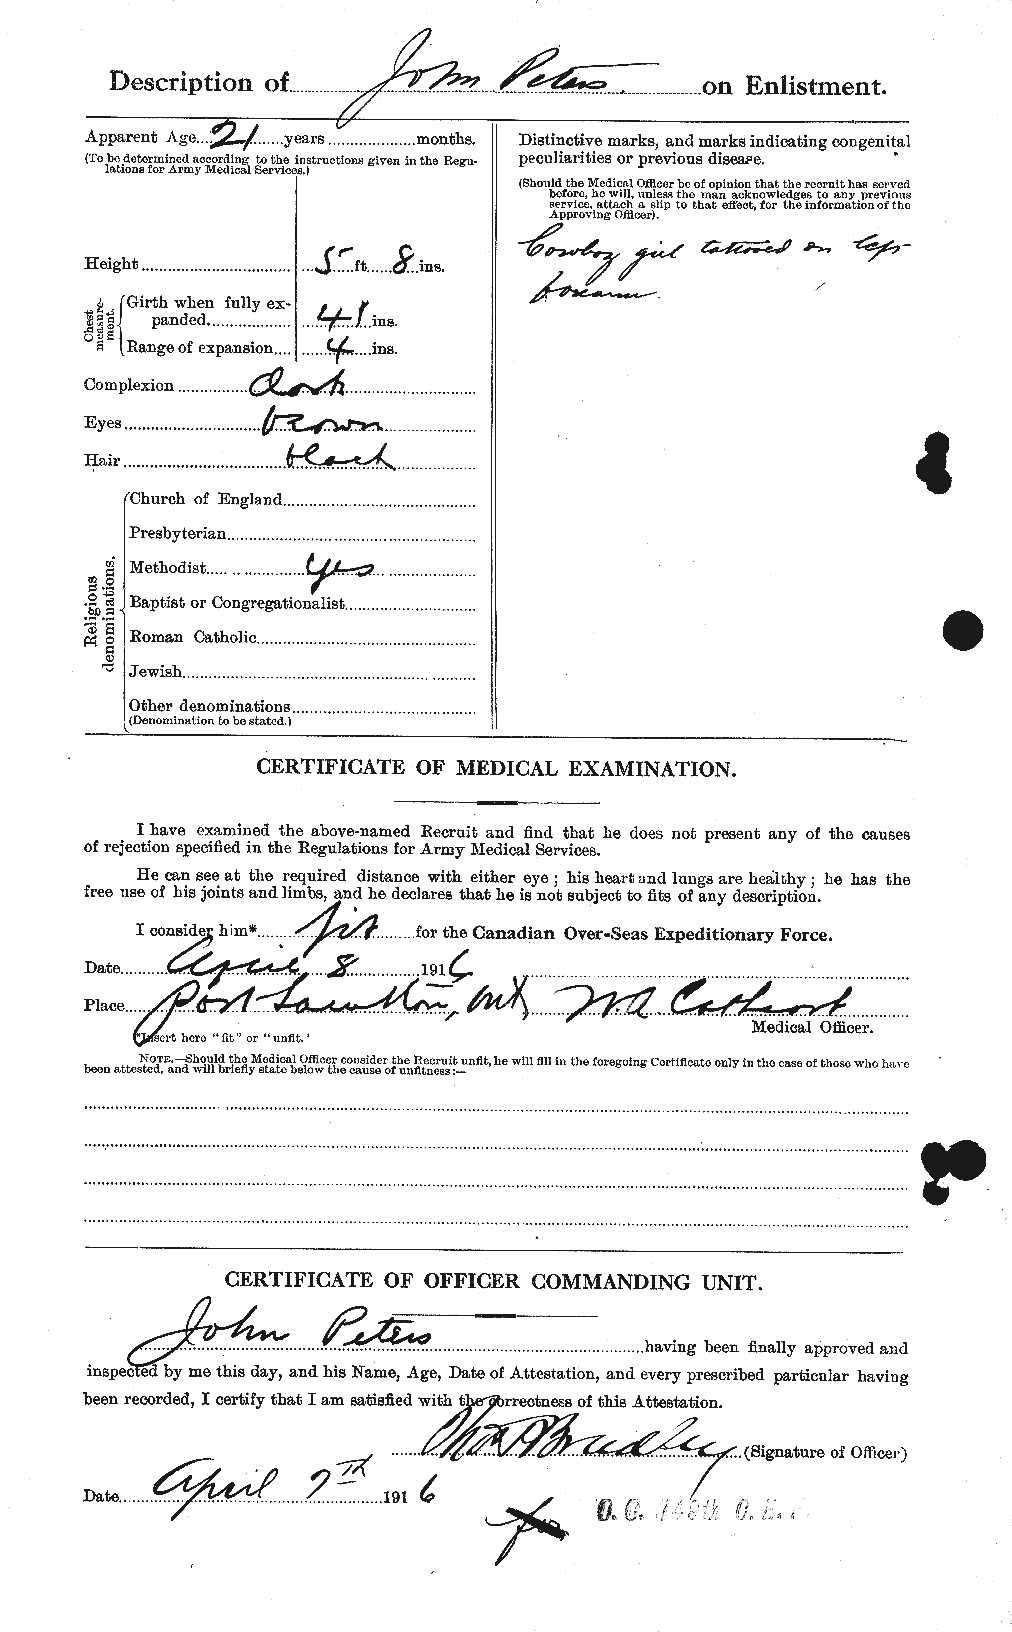 Personnel Records of the First World War - CEF 575542b